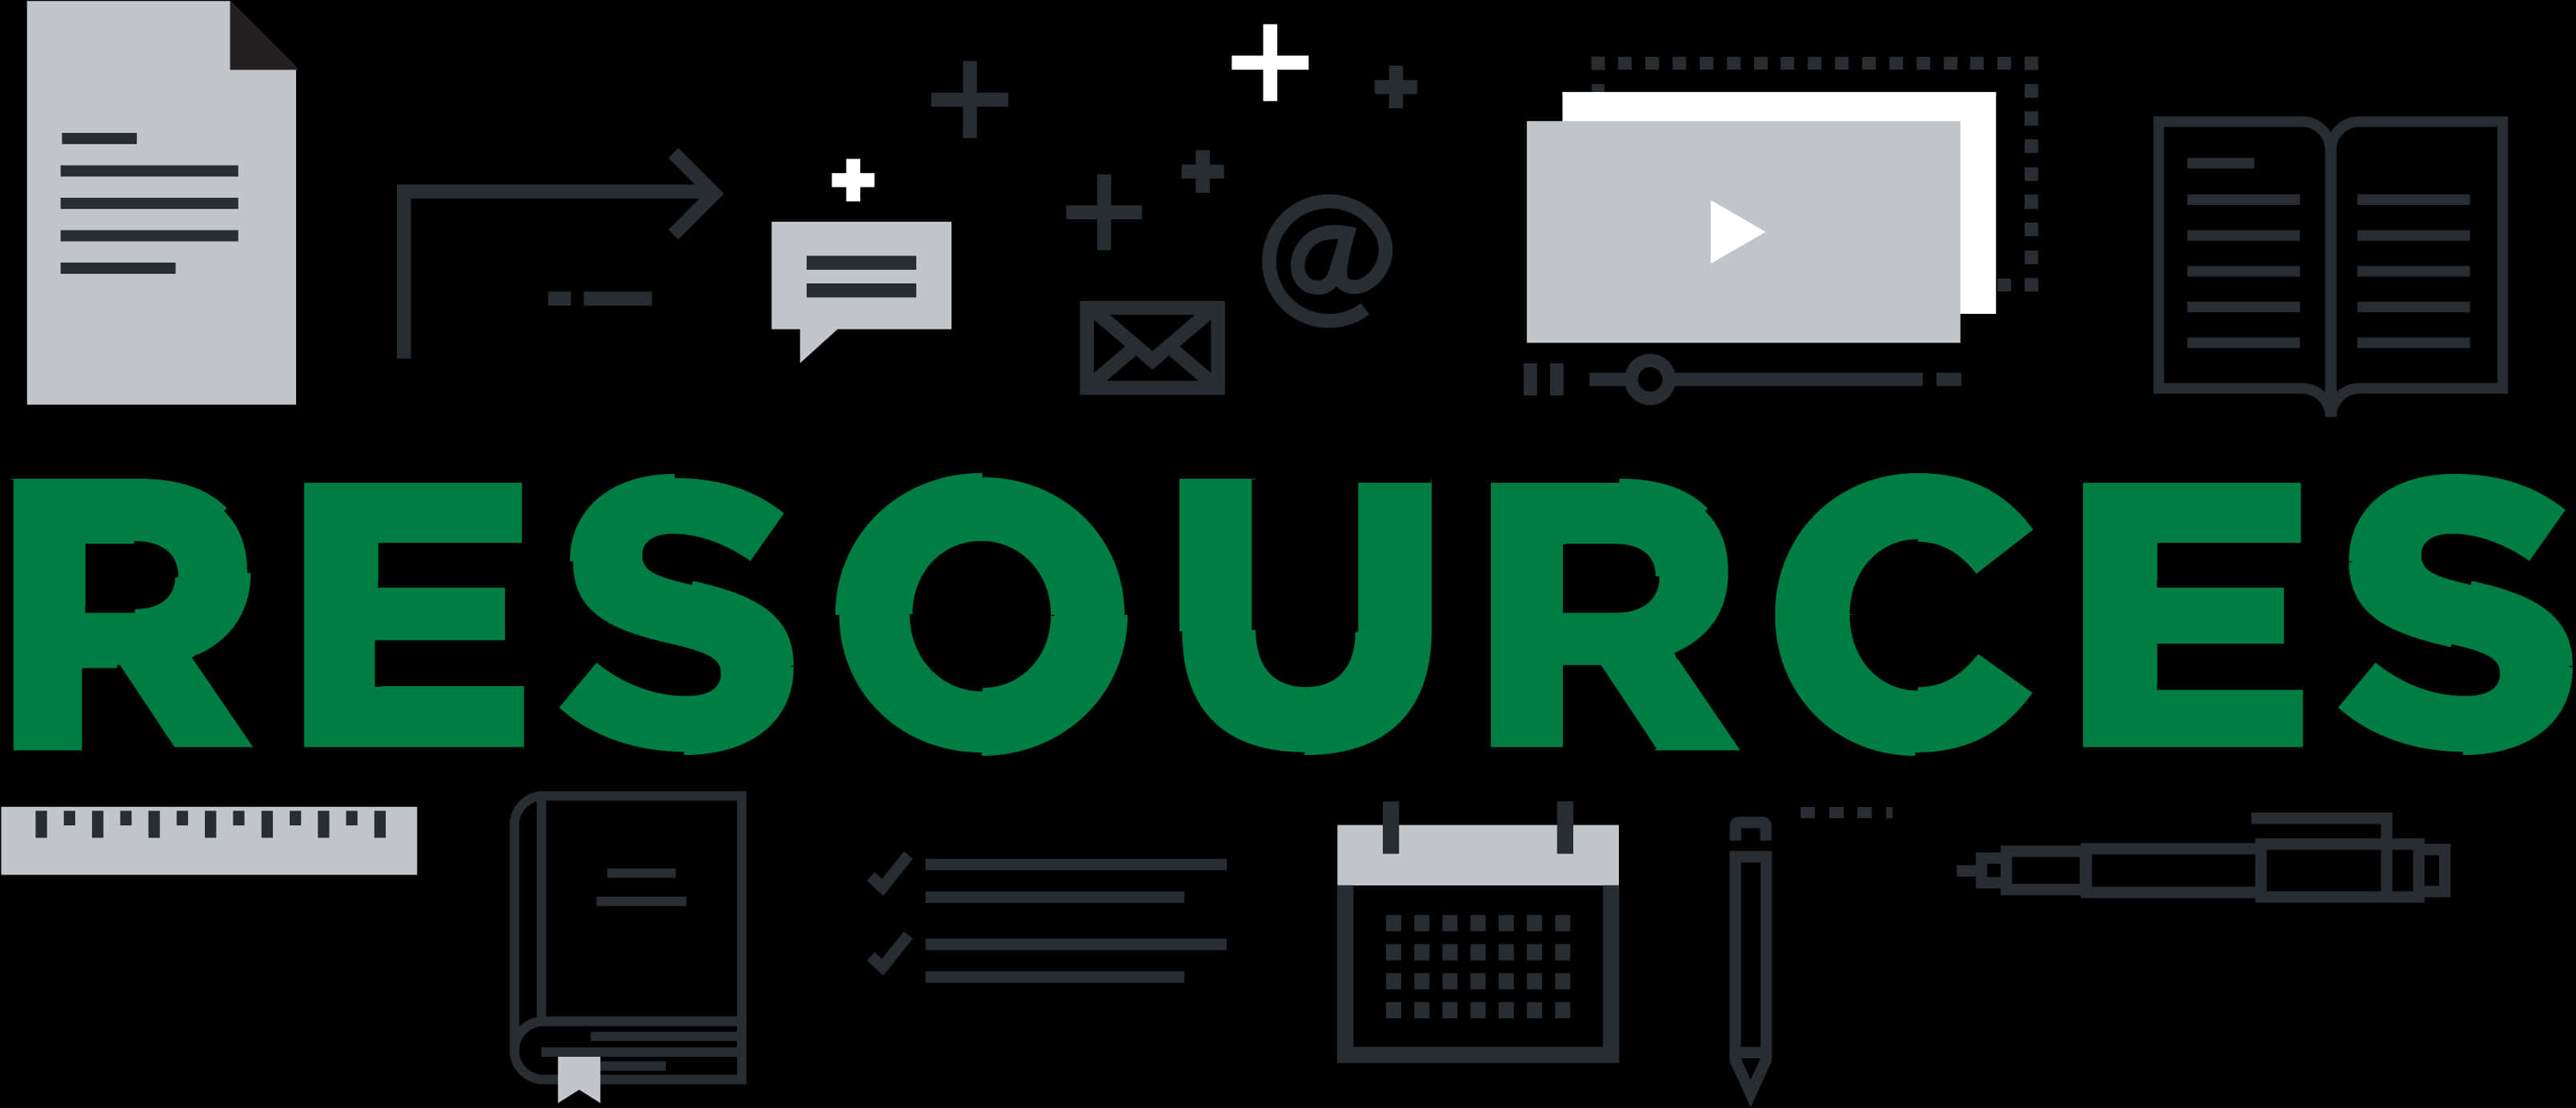 Resources Graphic - Communication Toolkit, Hd Png Download